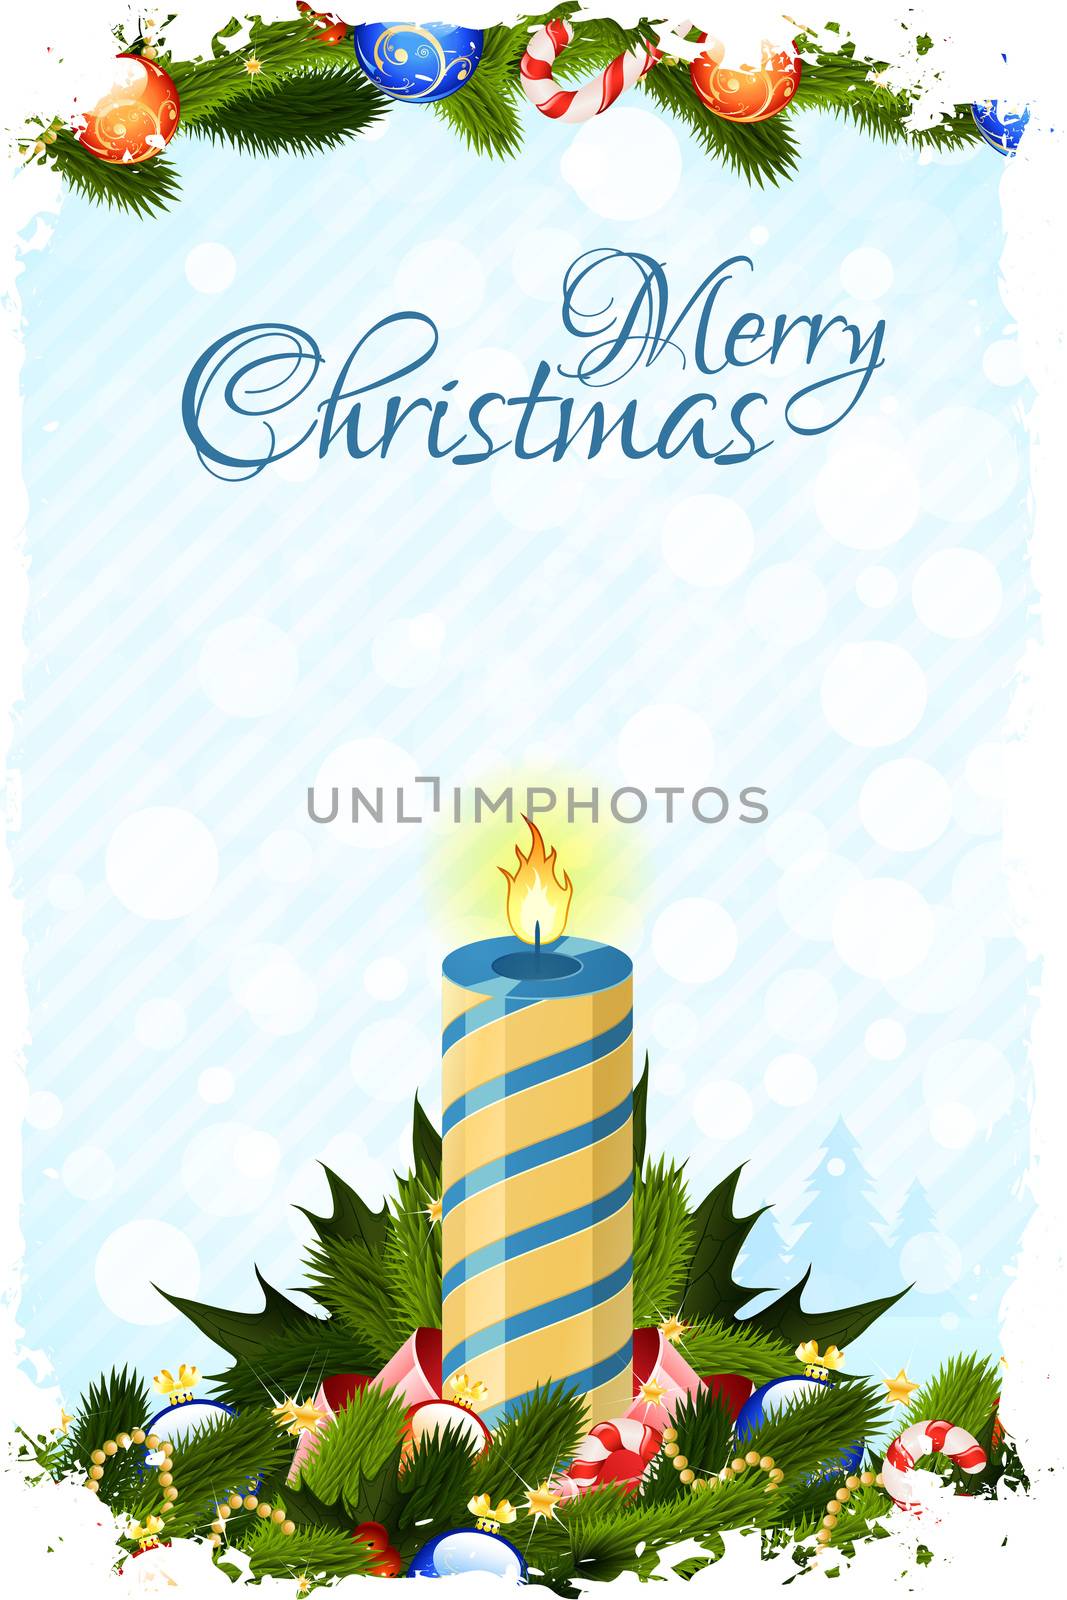 Grungy Christmas Card with Decorations by WaD